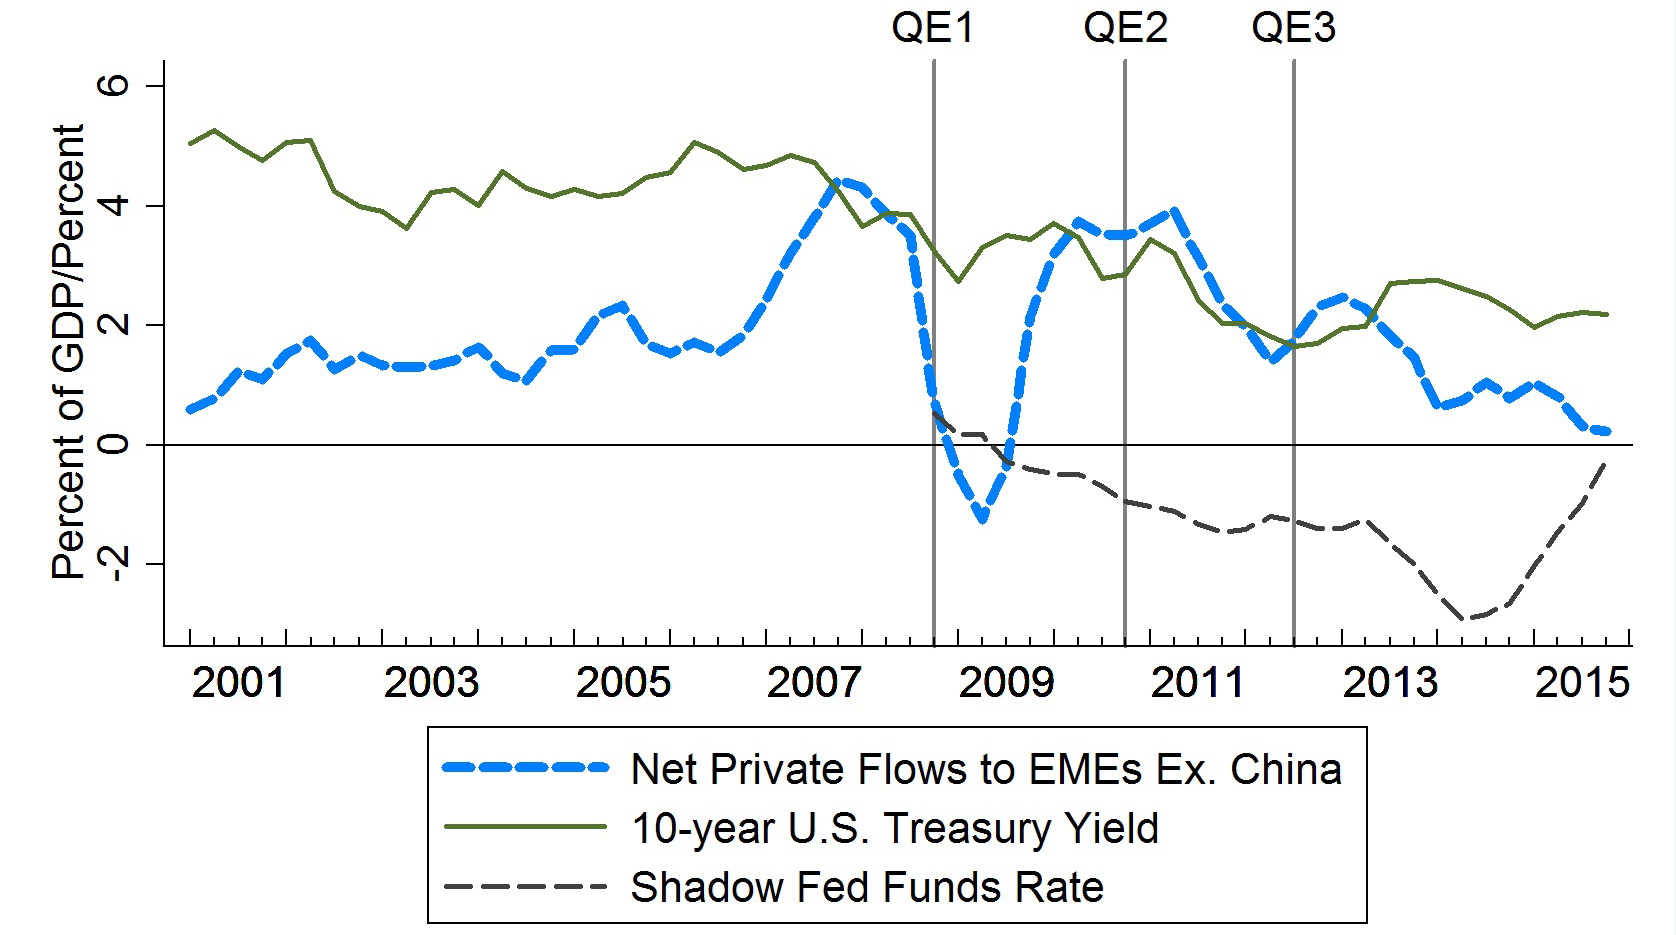 Chart 5: Net Private Flows and U.S. Interest Rates. See accessible link for data.